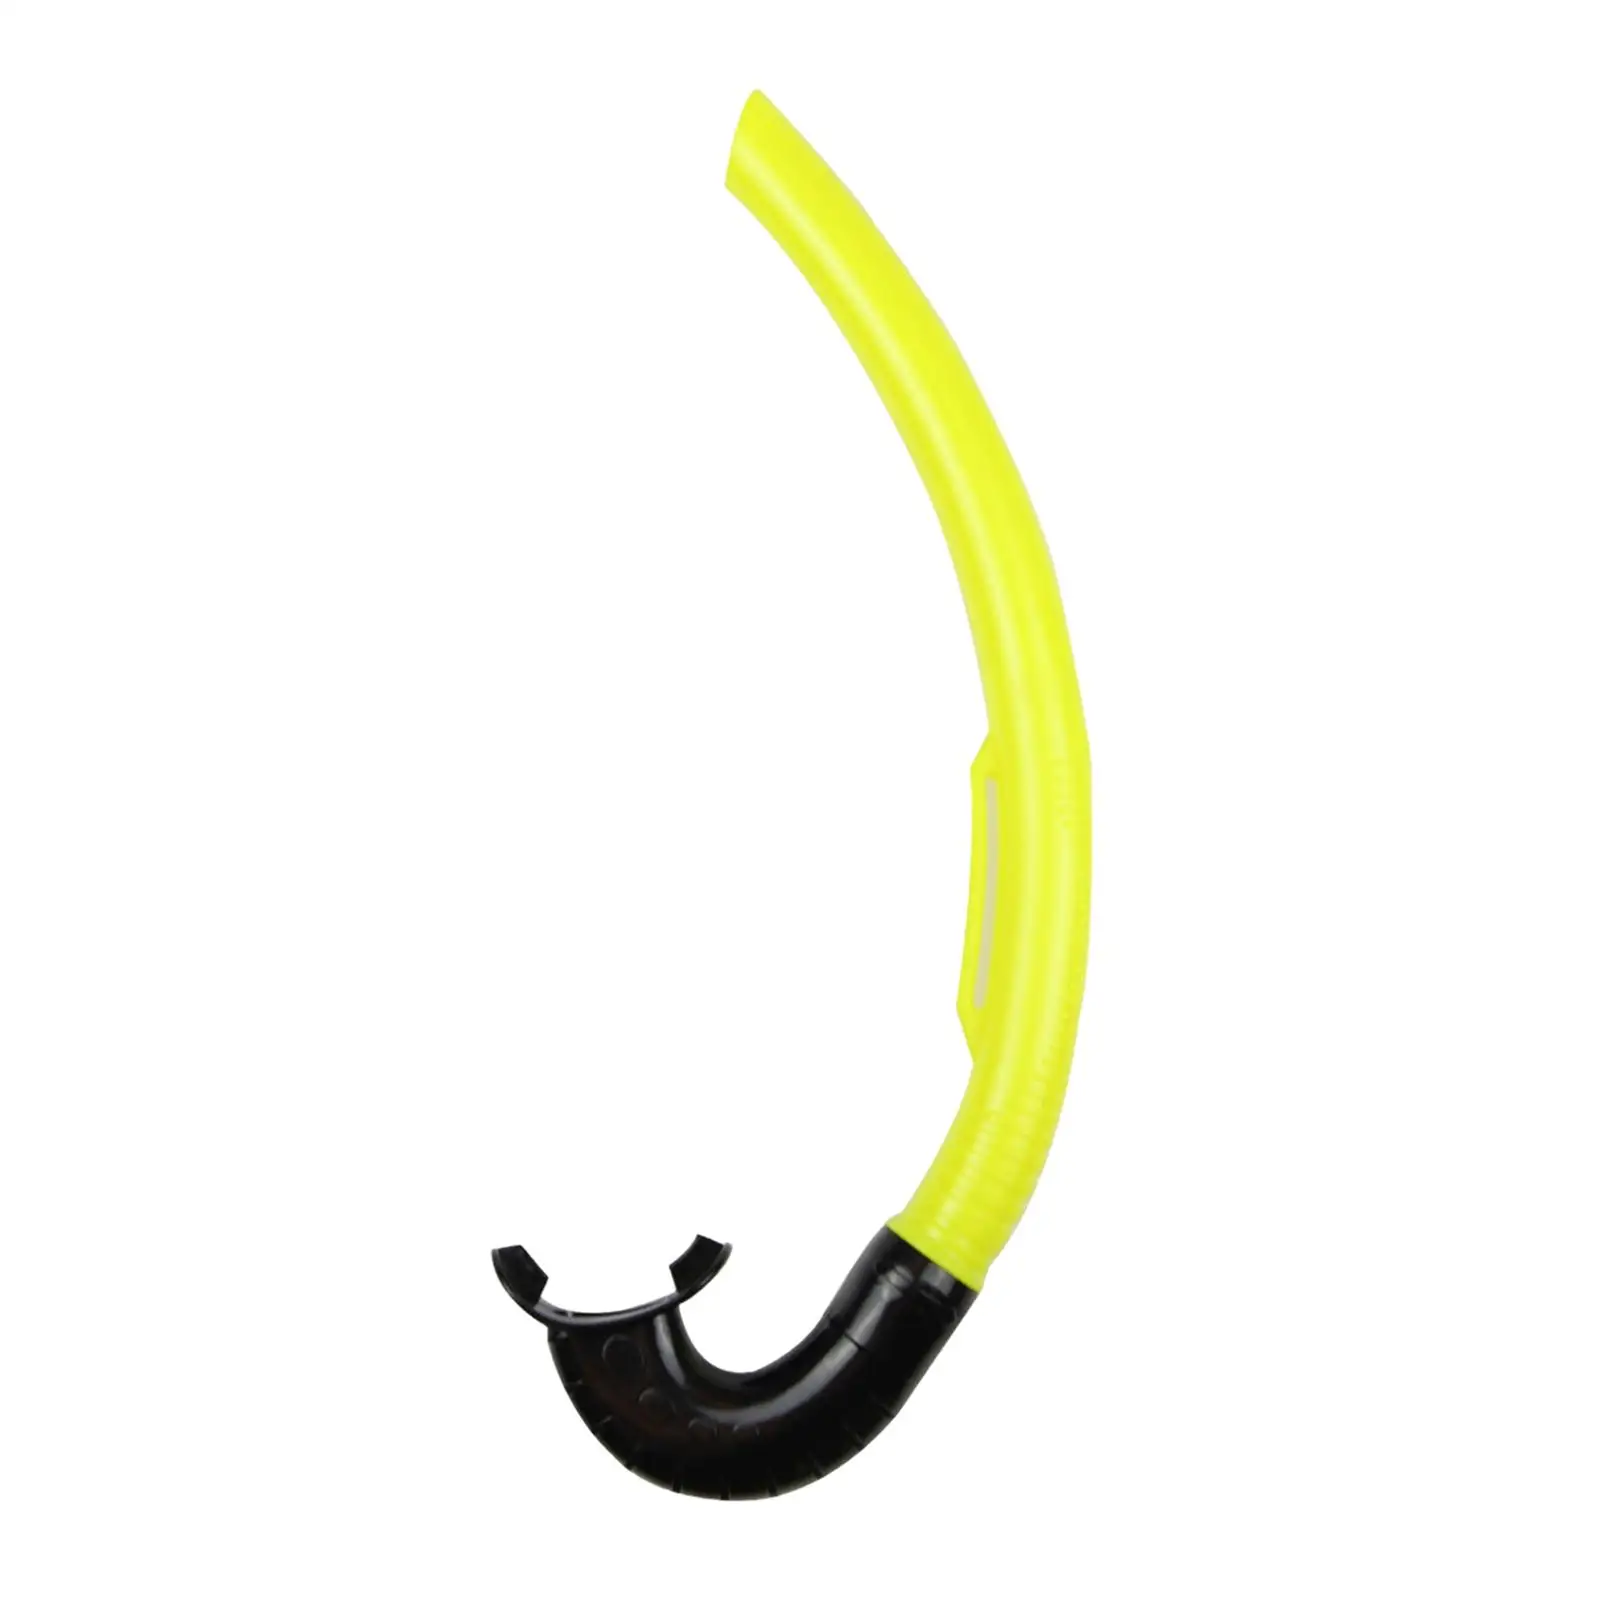 Dry Snorkel Full Wet Breathing Tube for Adults Facing Forward Scuba Diving